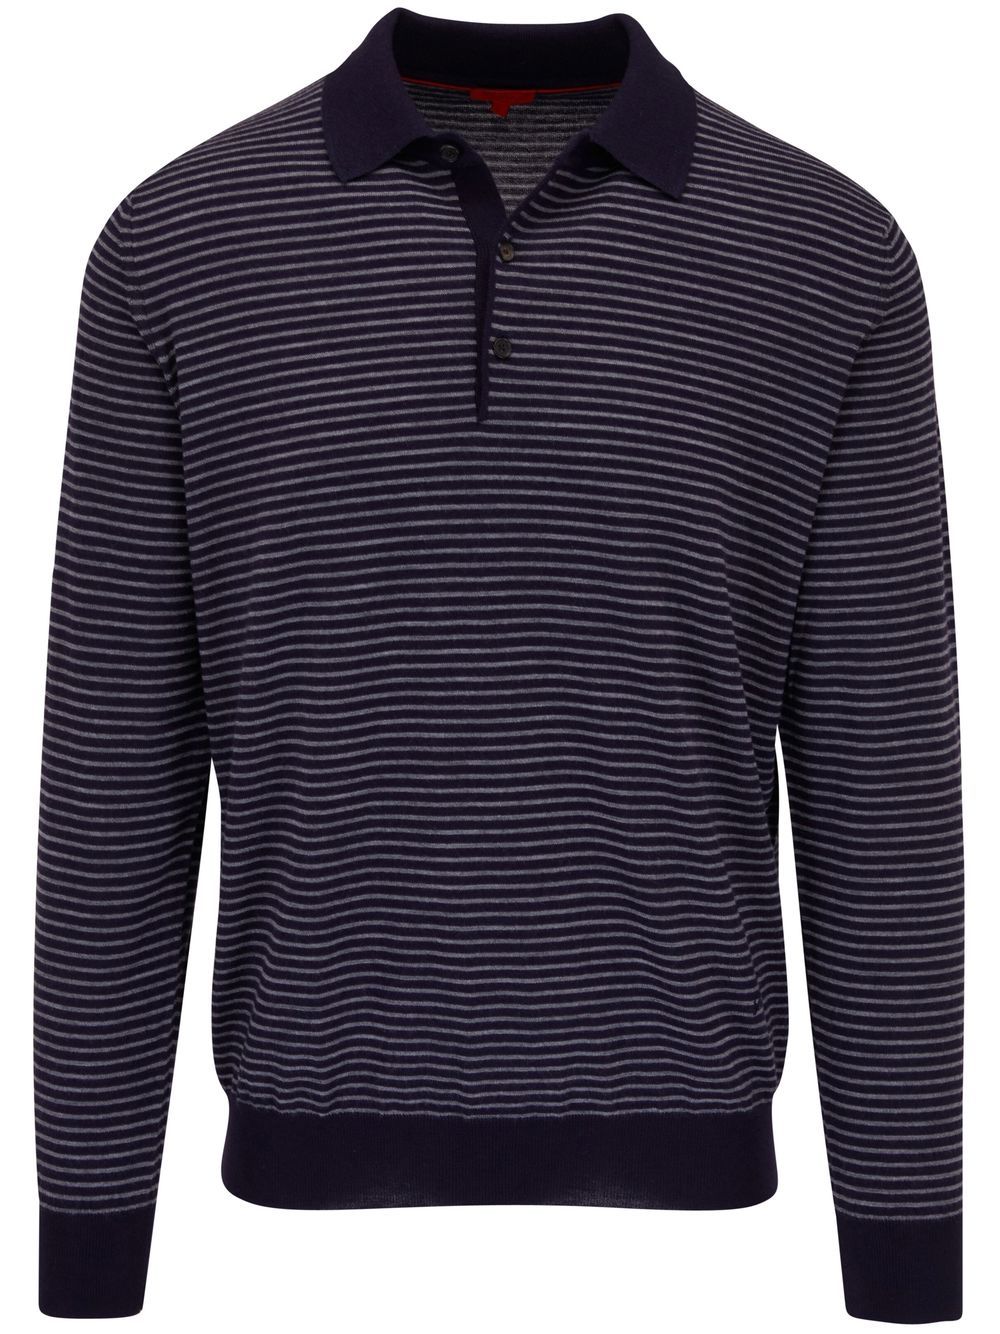 Isaia Striped Knitted Polo Shirt - Farfetch